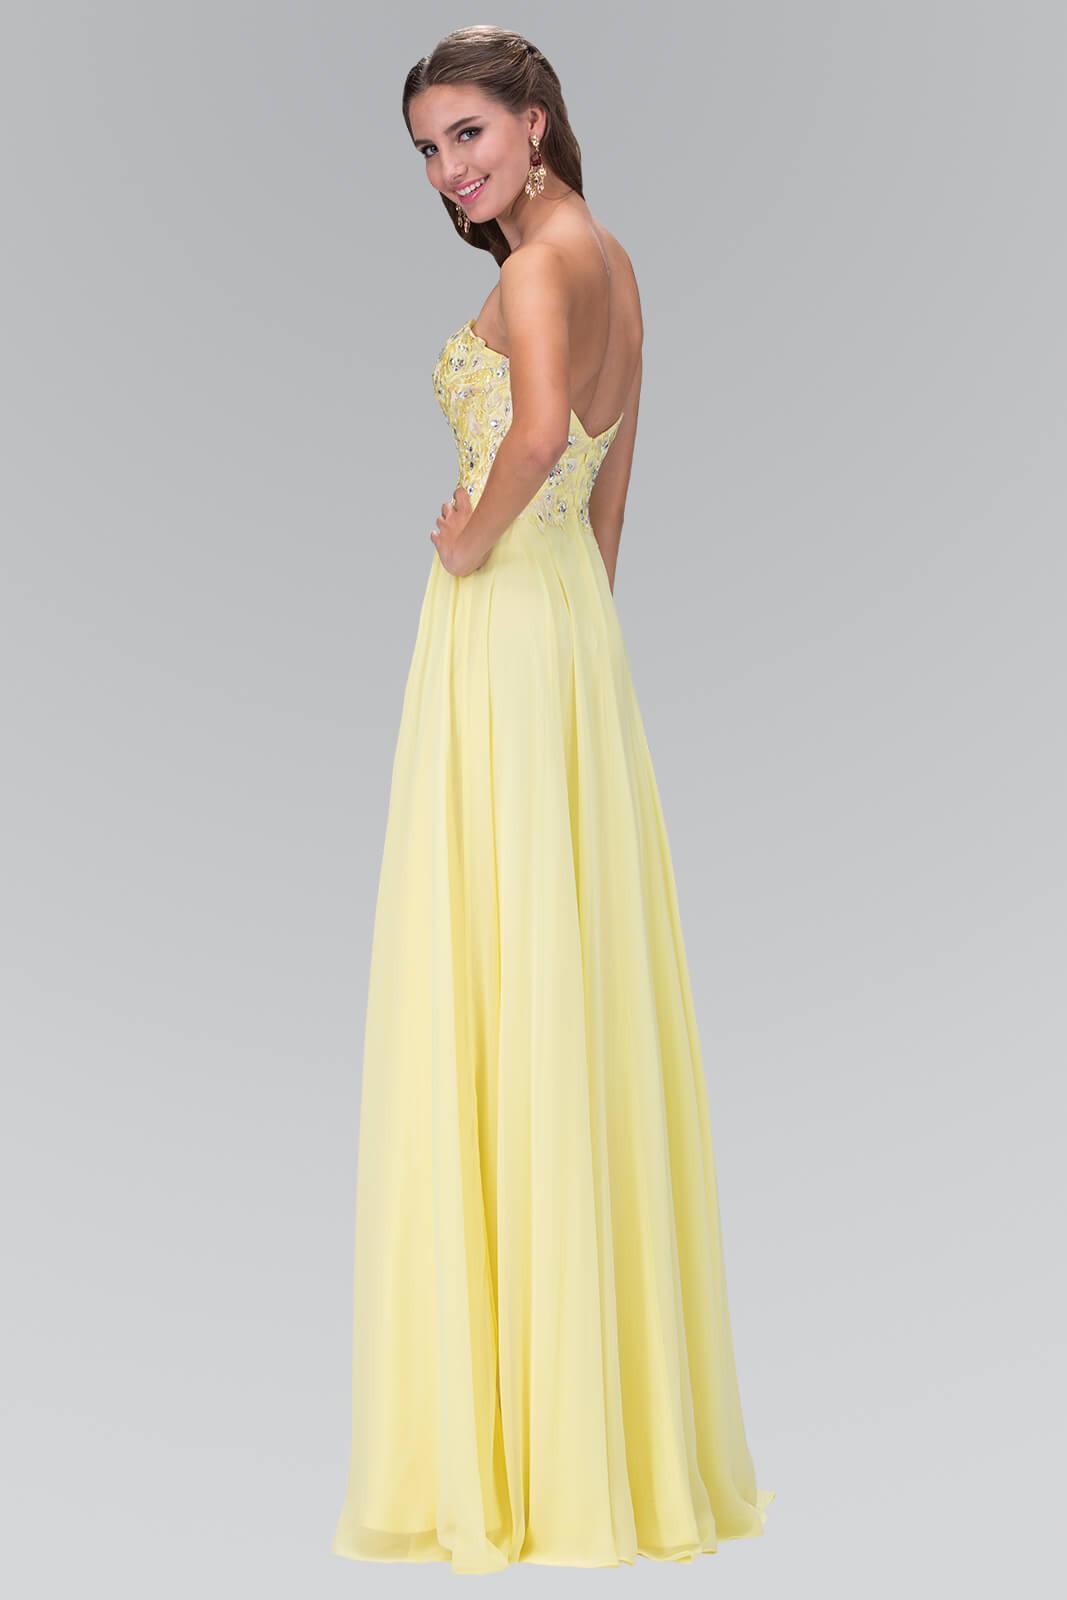 Prom Long Dress Strapless Chiffon Formal Evening Gown - The Dress Outlet Elizabeth K